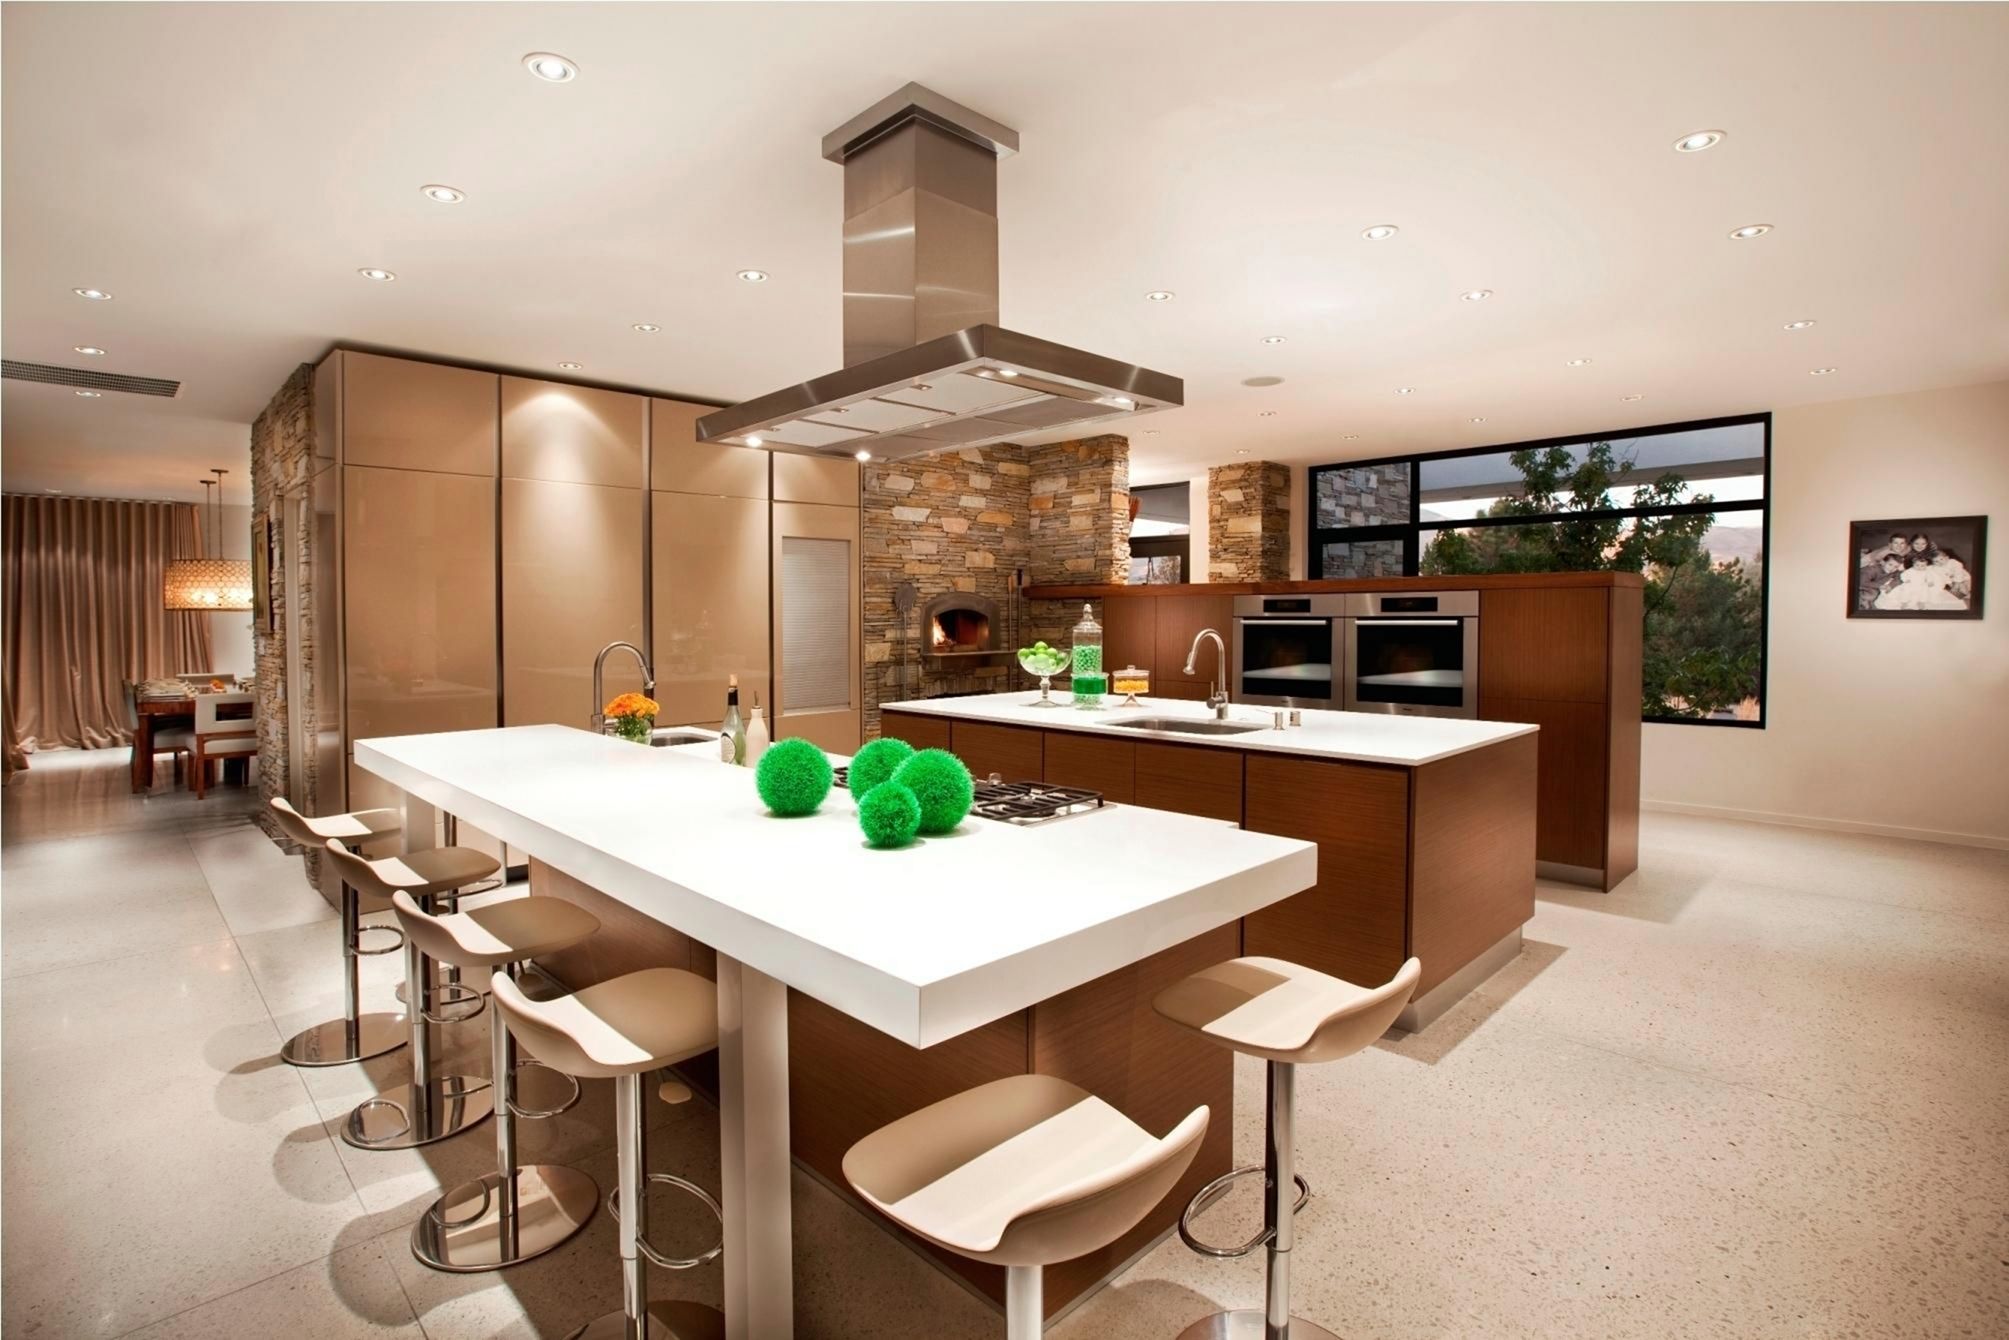 Transitional Kitchen Designs From Nyupoco